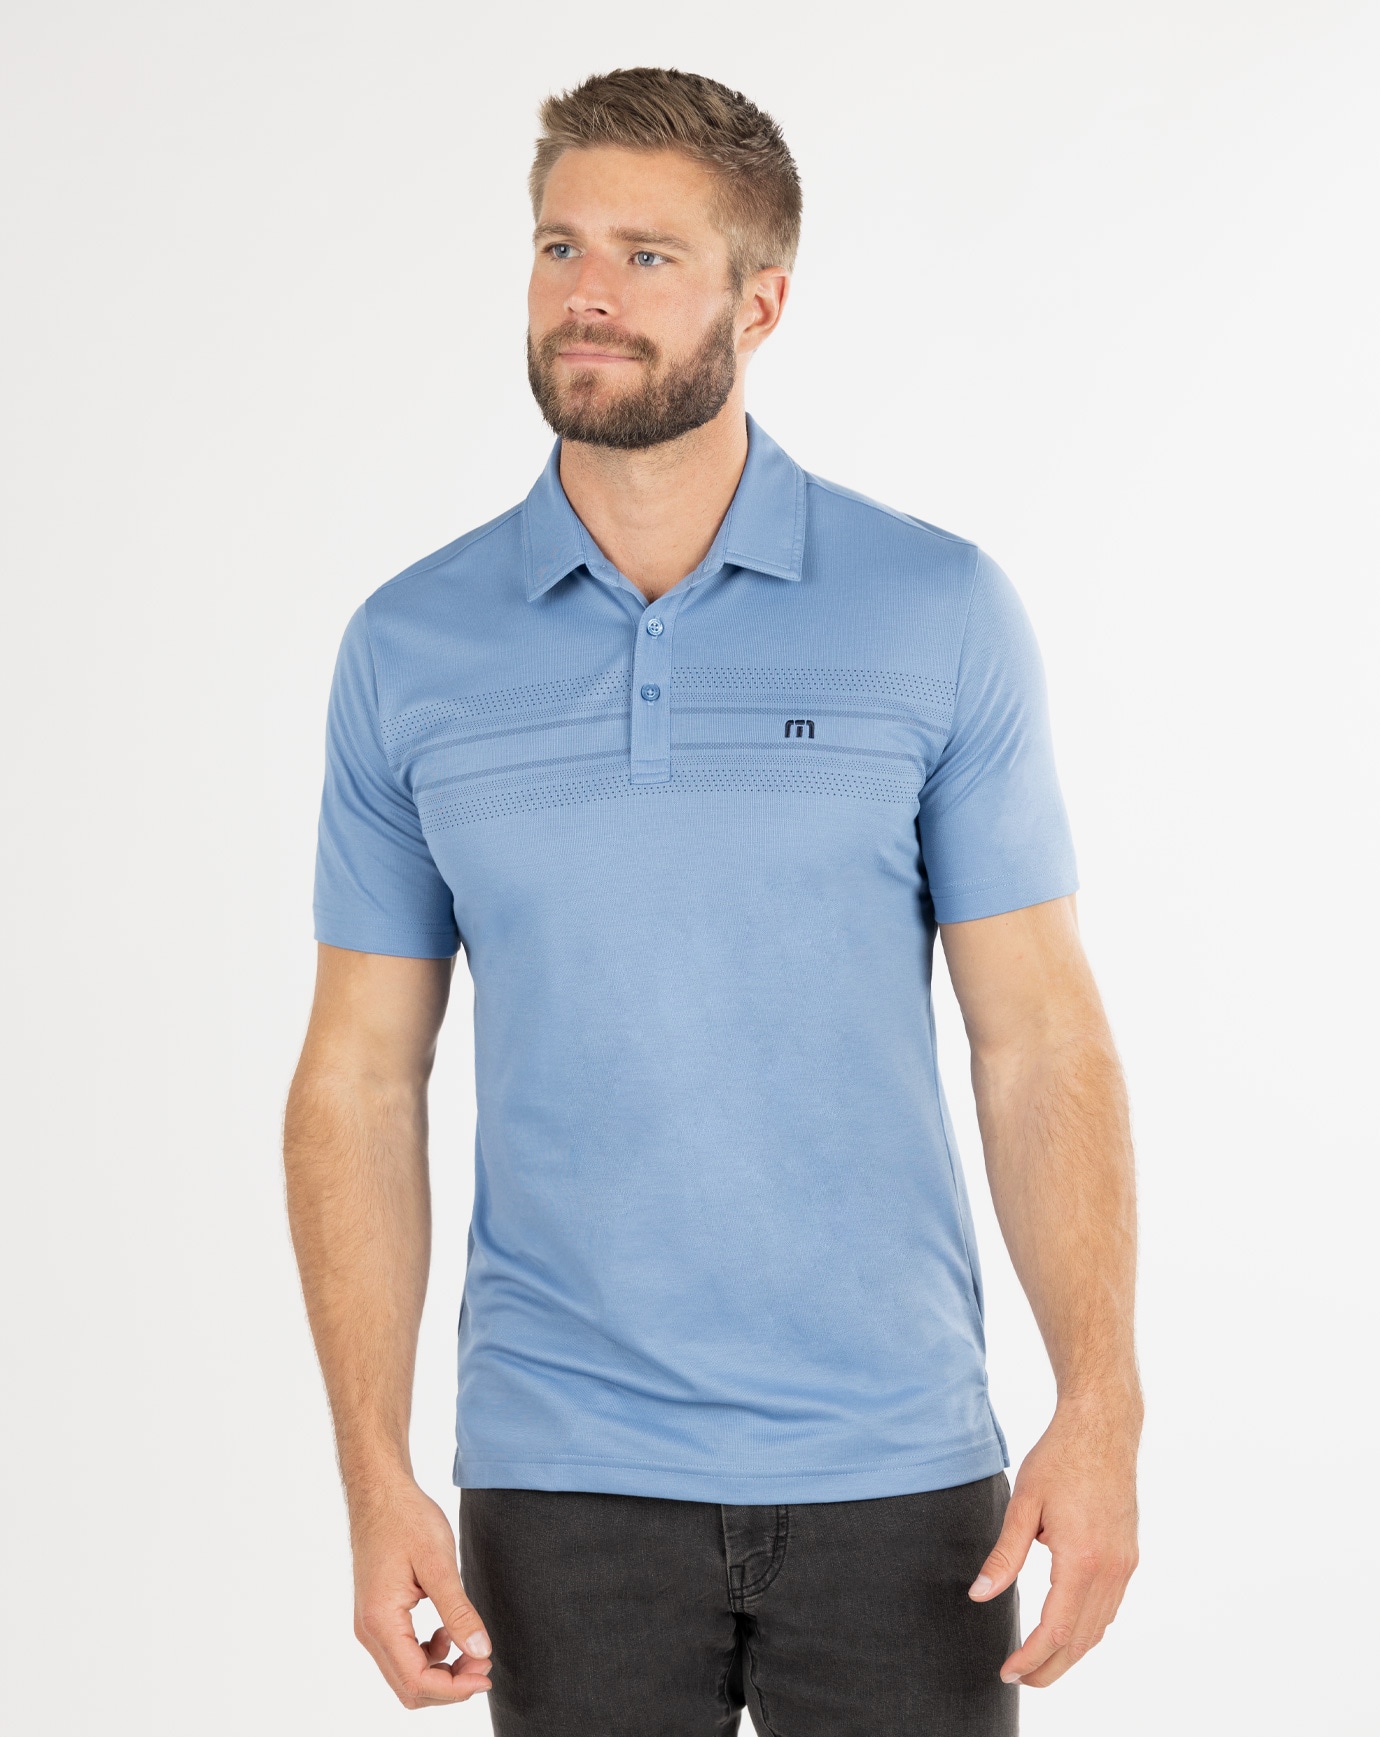 Related Product - SCRAMBLER POLO